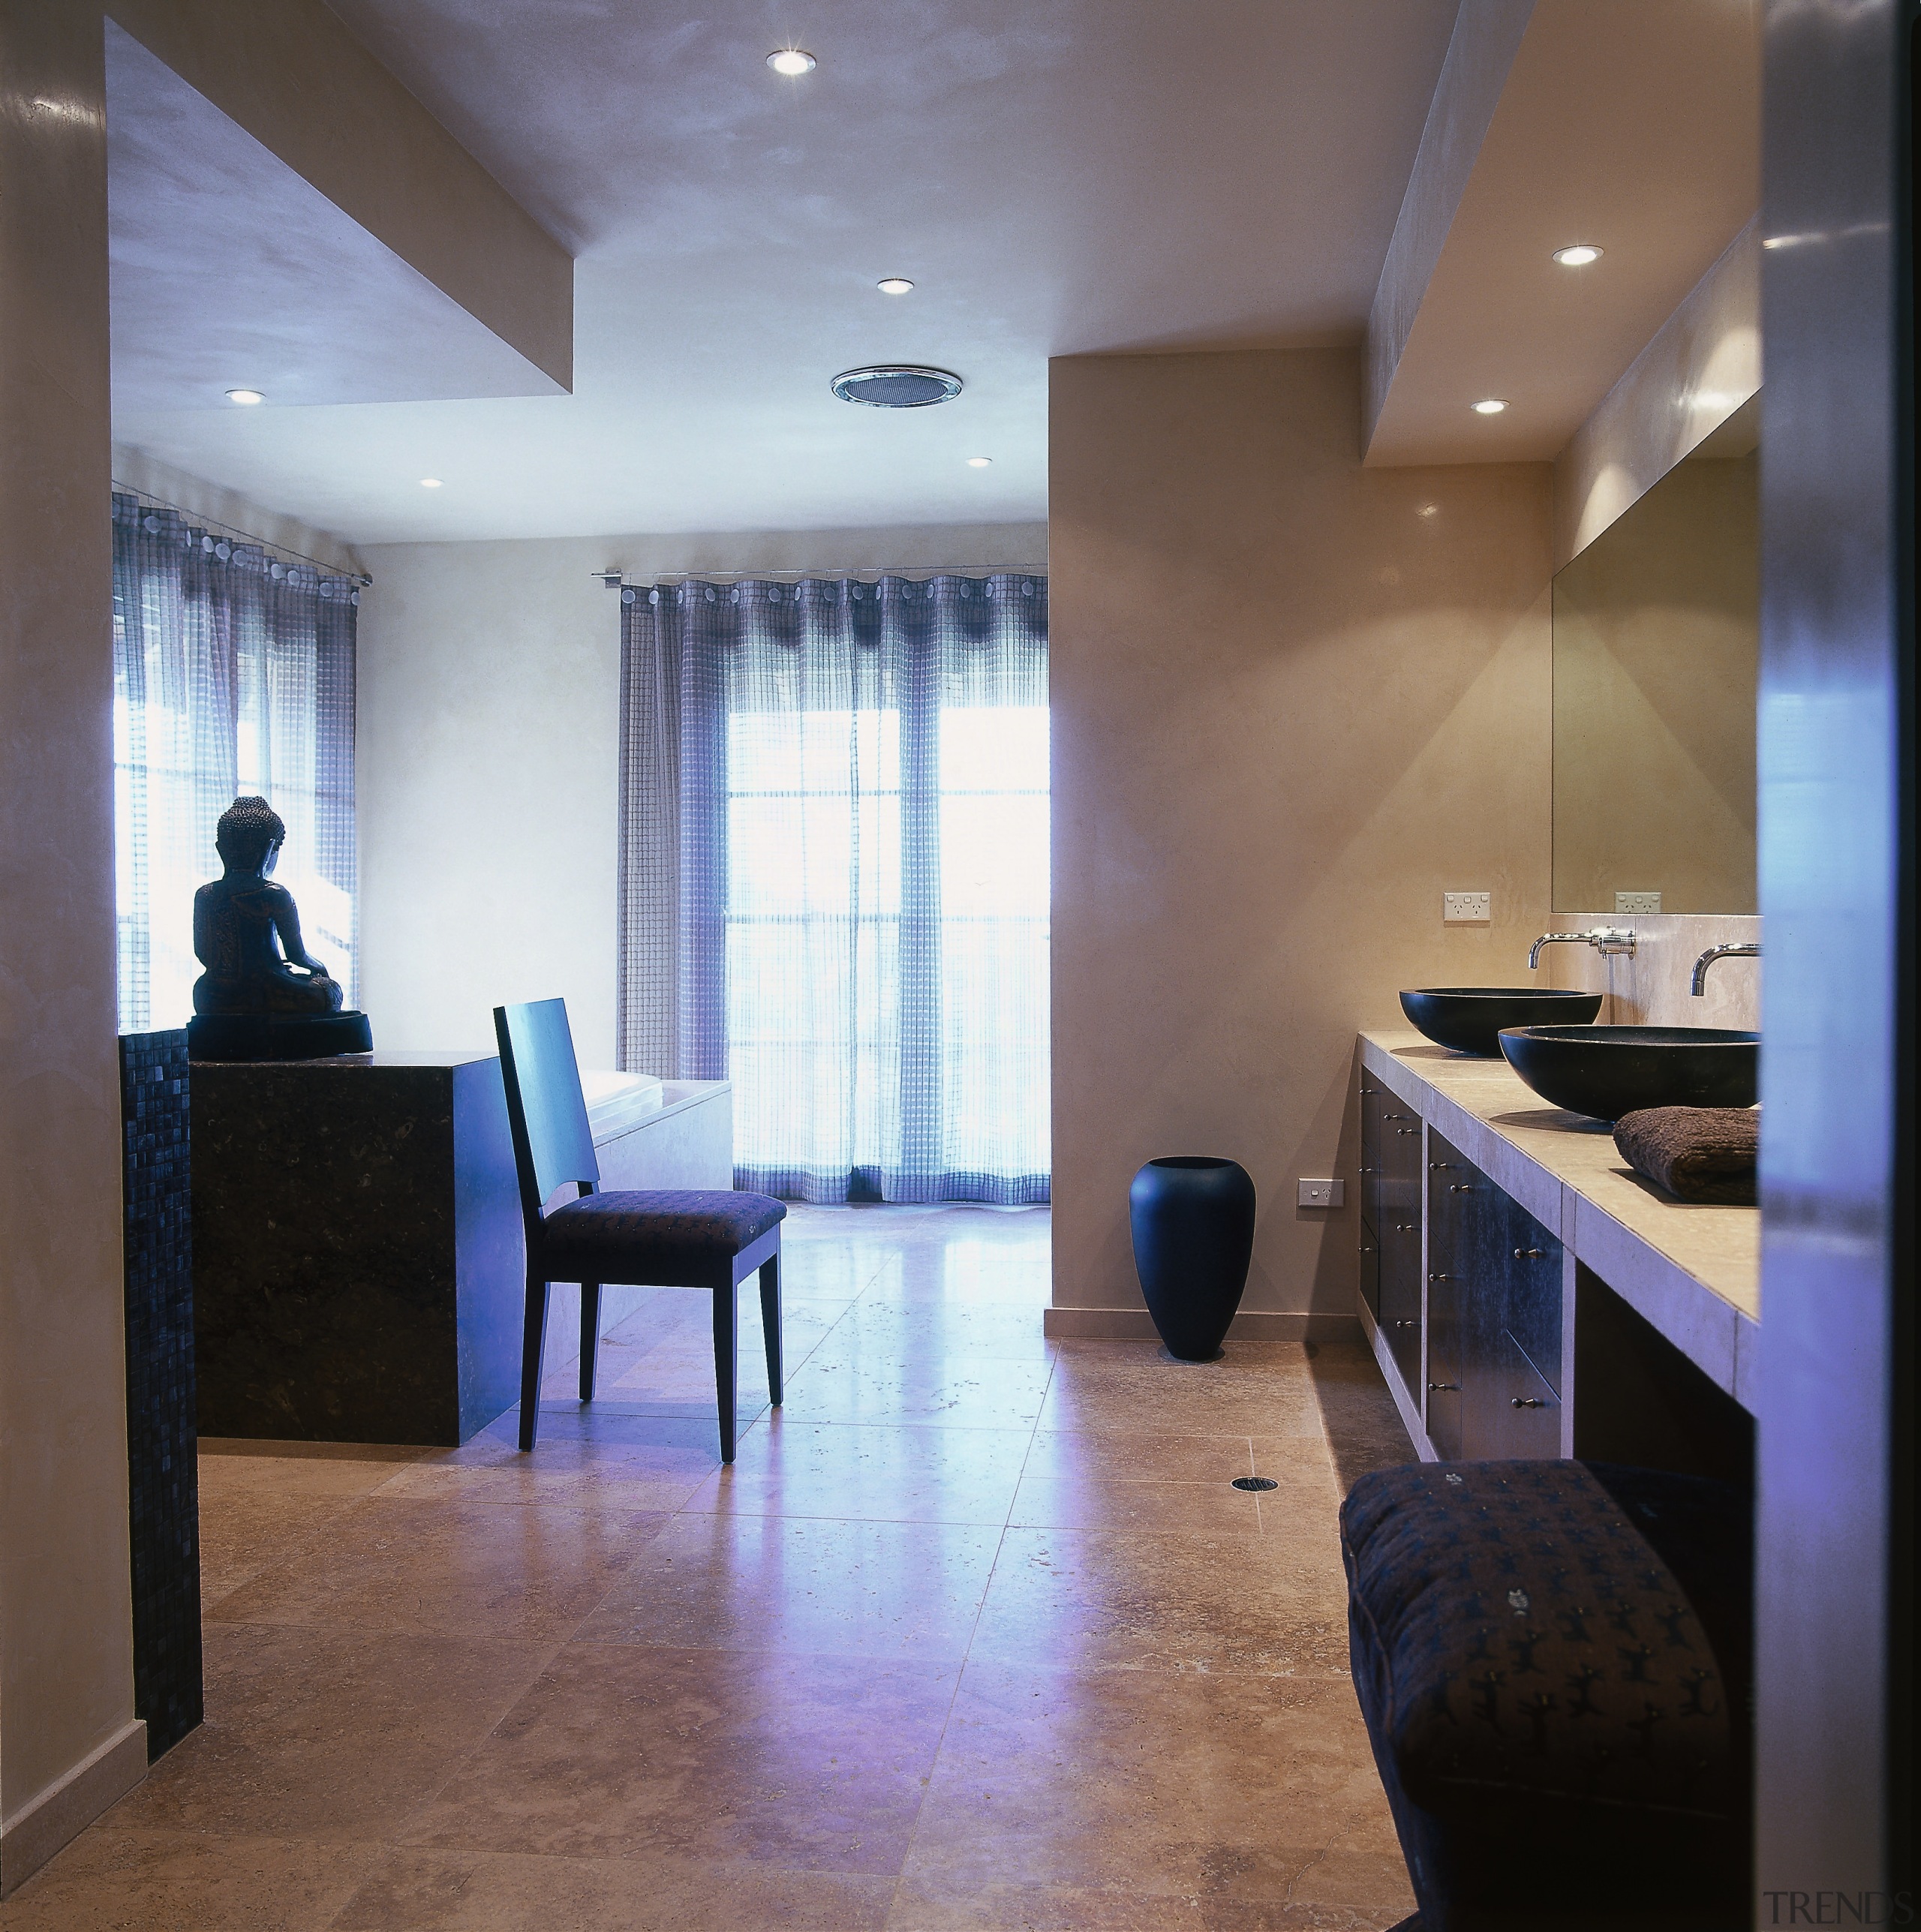 The view of a bathroom from the doorway ceiling, floor, flooring, interior design, lobby, real estate, room